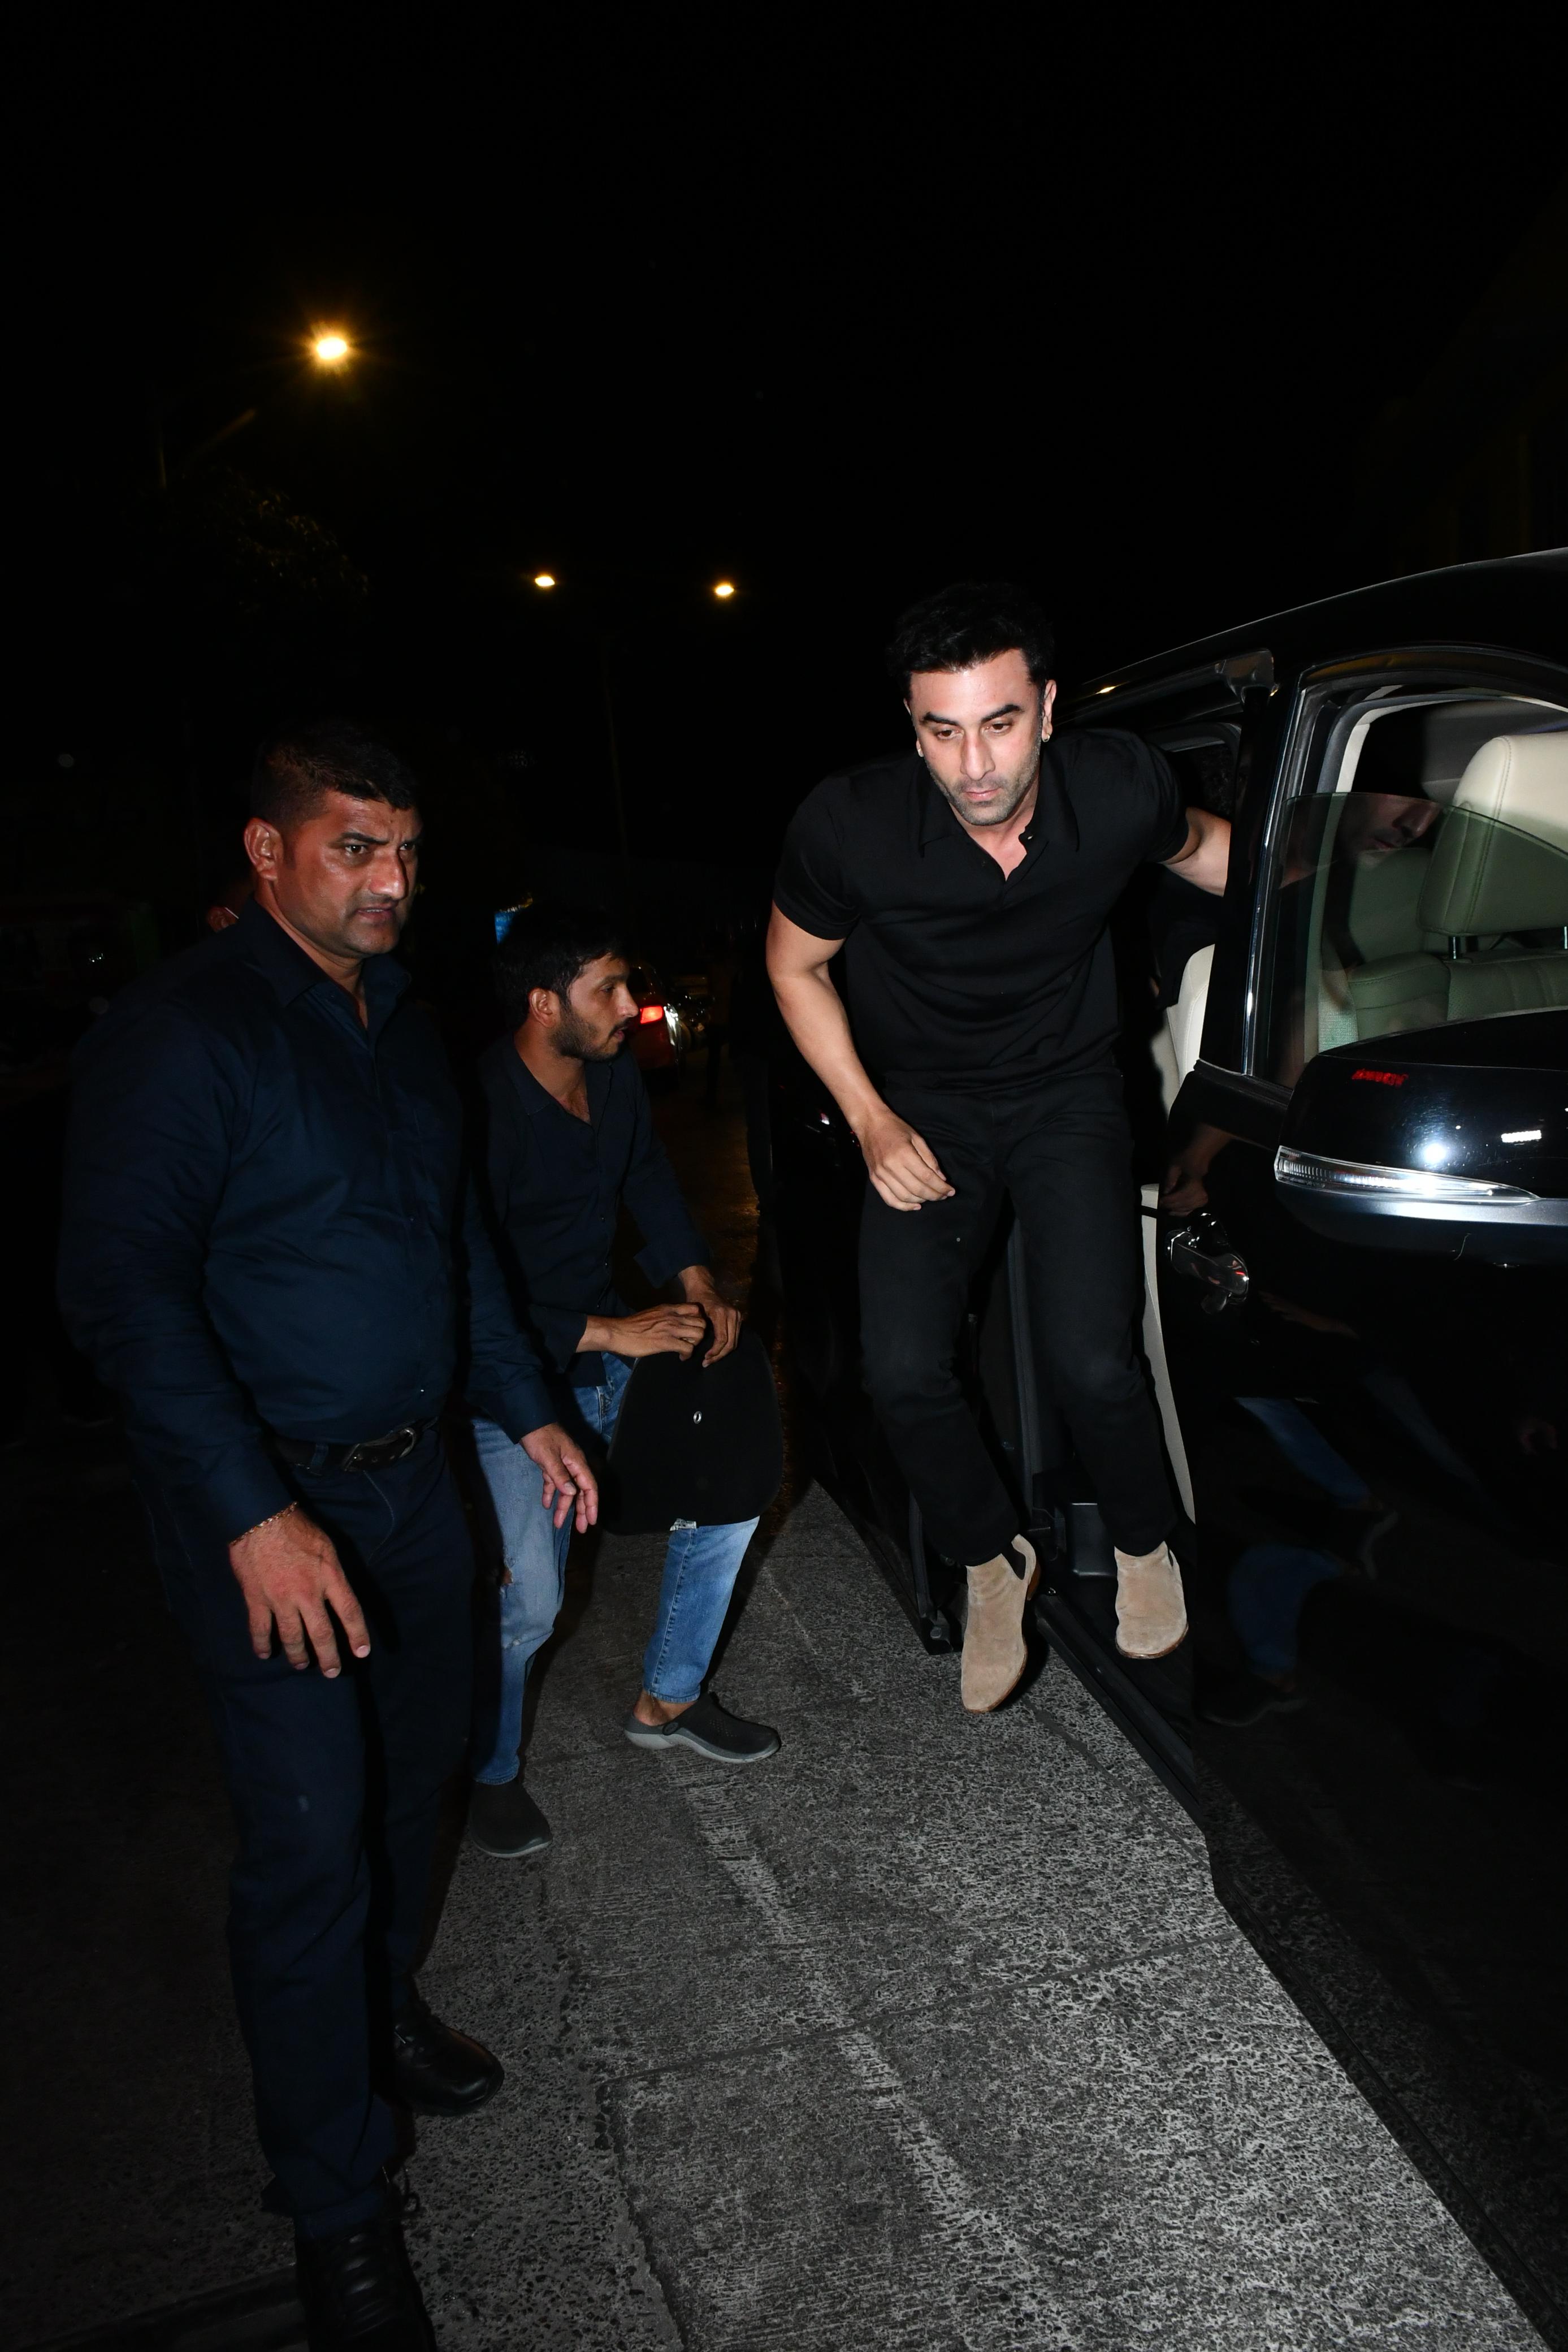 Ranbir Kapoor went to be the part of the dinner bash at Veronica restaurant in Mumbai